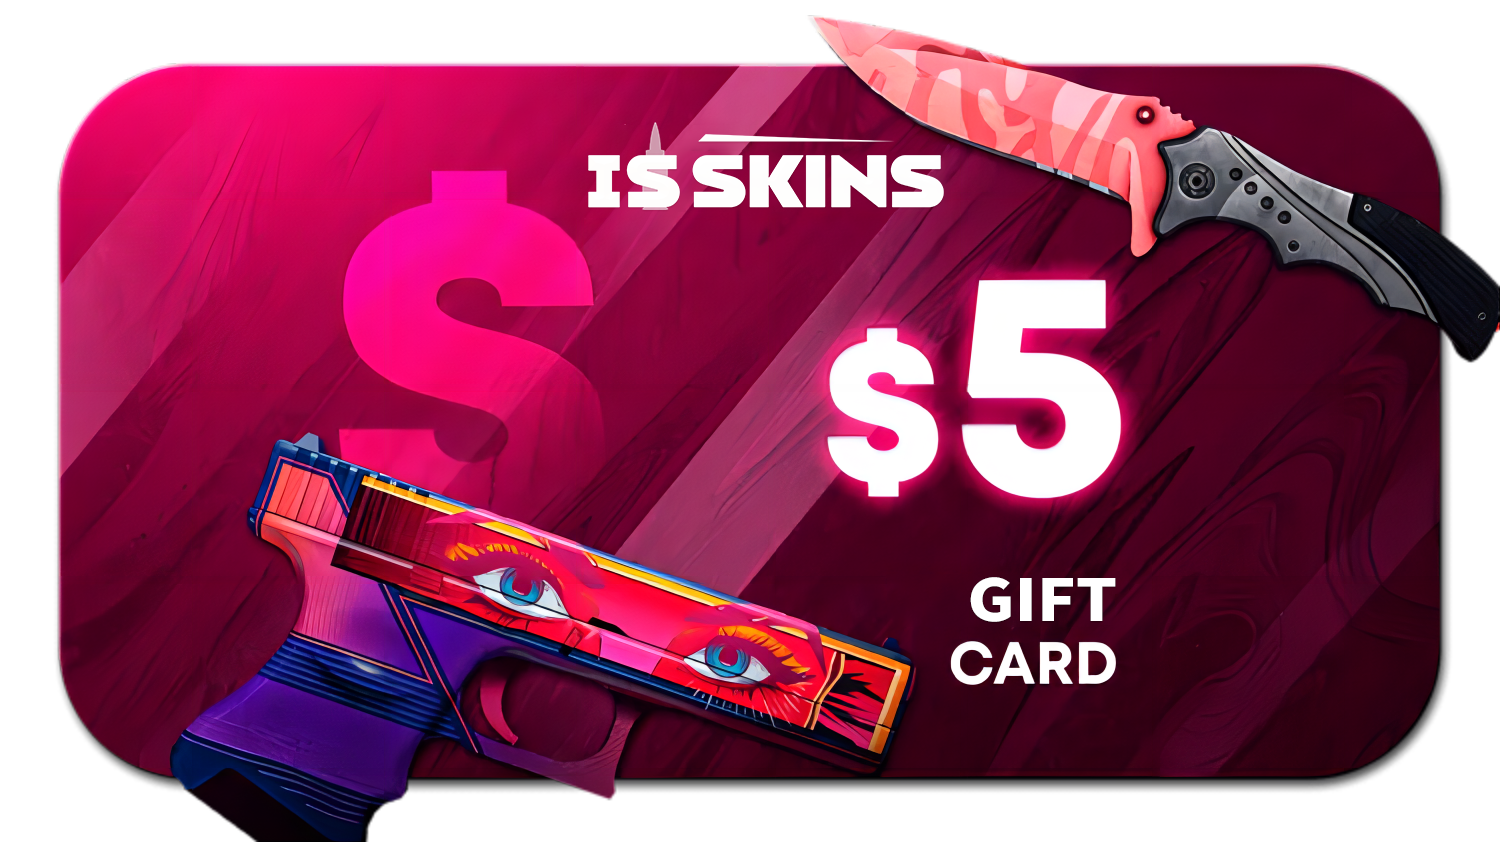 ISSKINS $5 Gift Card 5.29$